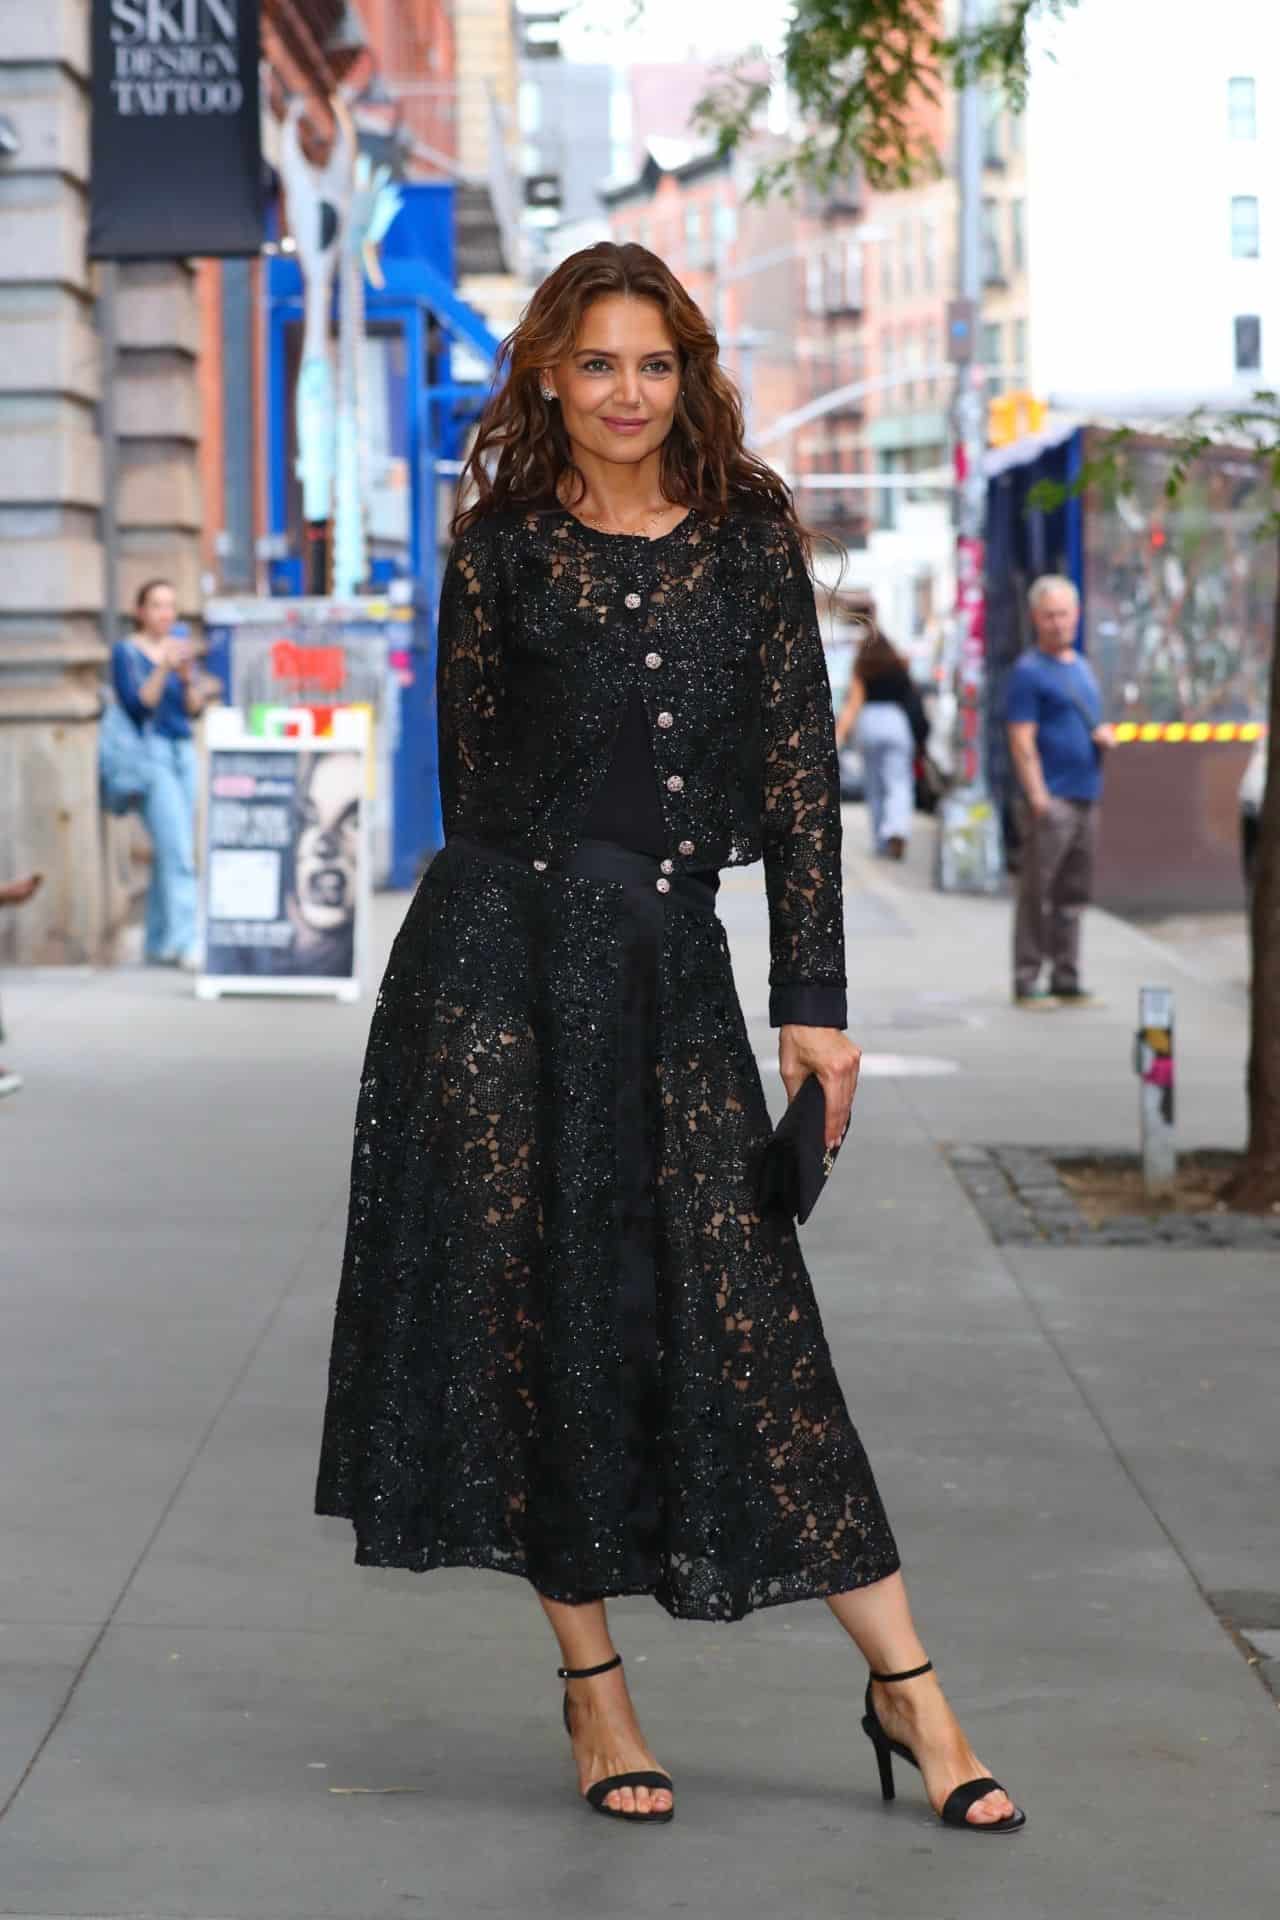 Katie Holmes Dazzles in Elegant Black Lace Dress and Stylish Heels on NYC Streets! - 1